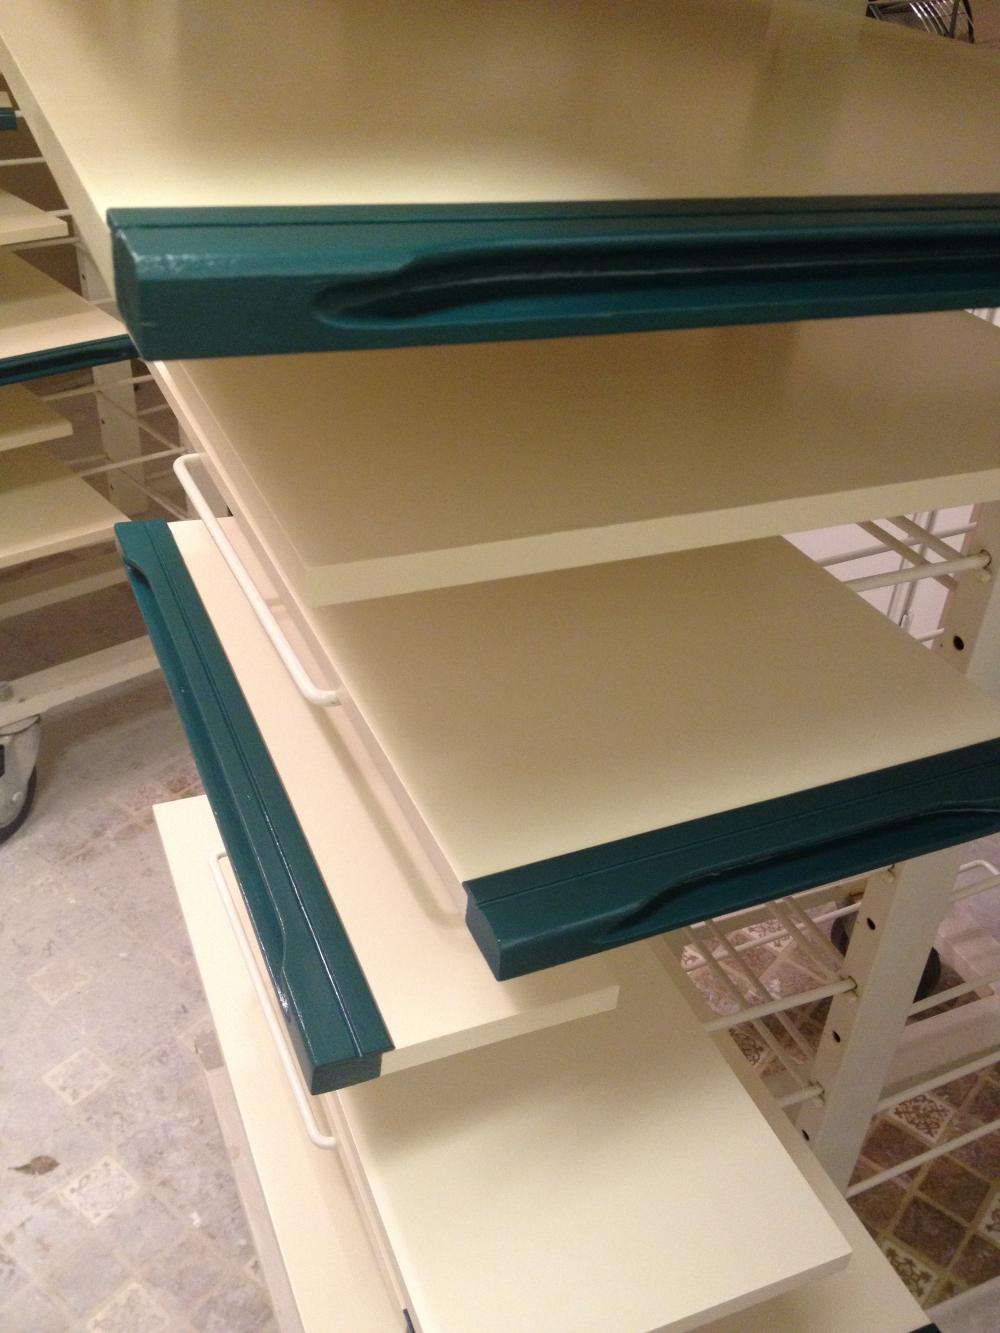 Painting vinyl cabinets with oak trim